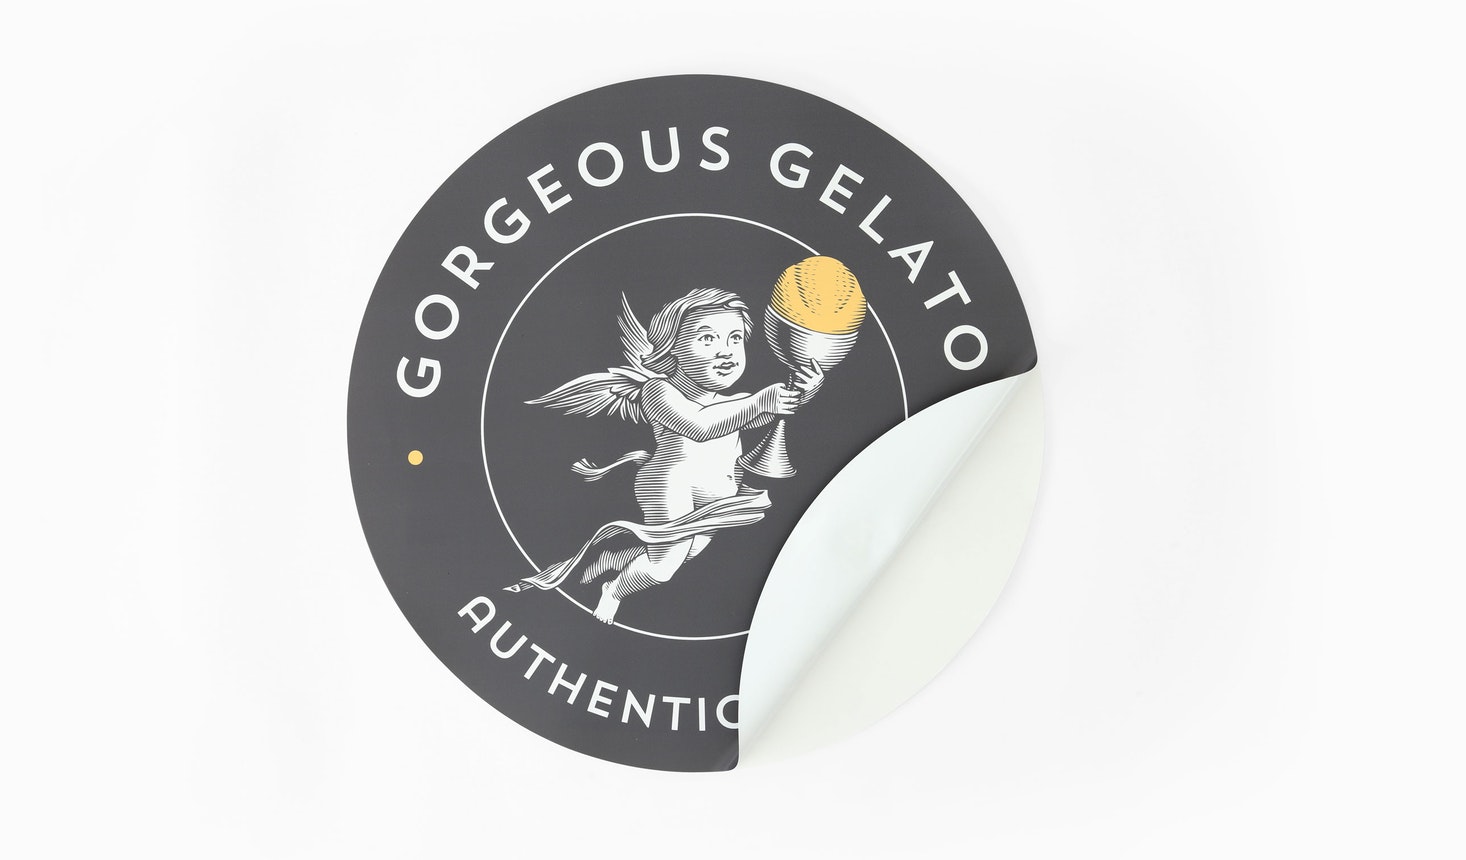 A custom vinyl wall decal printed with a round design and Gorgeous Gelato Authentic.